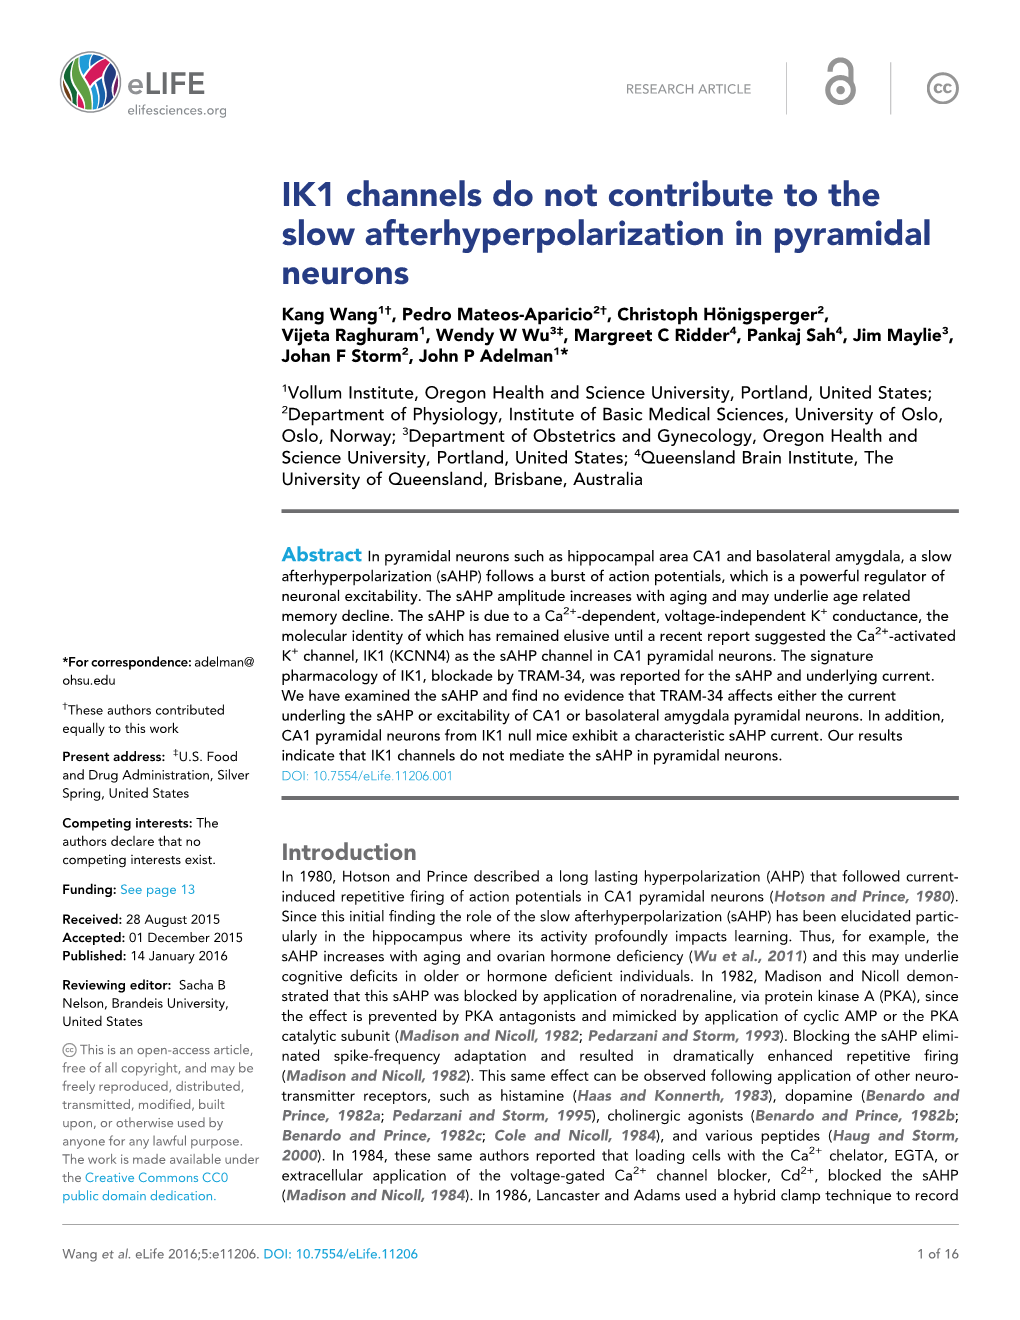 IK1 Channels Do Not Contribute to the Slow Afterhyperpolarization In